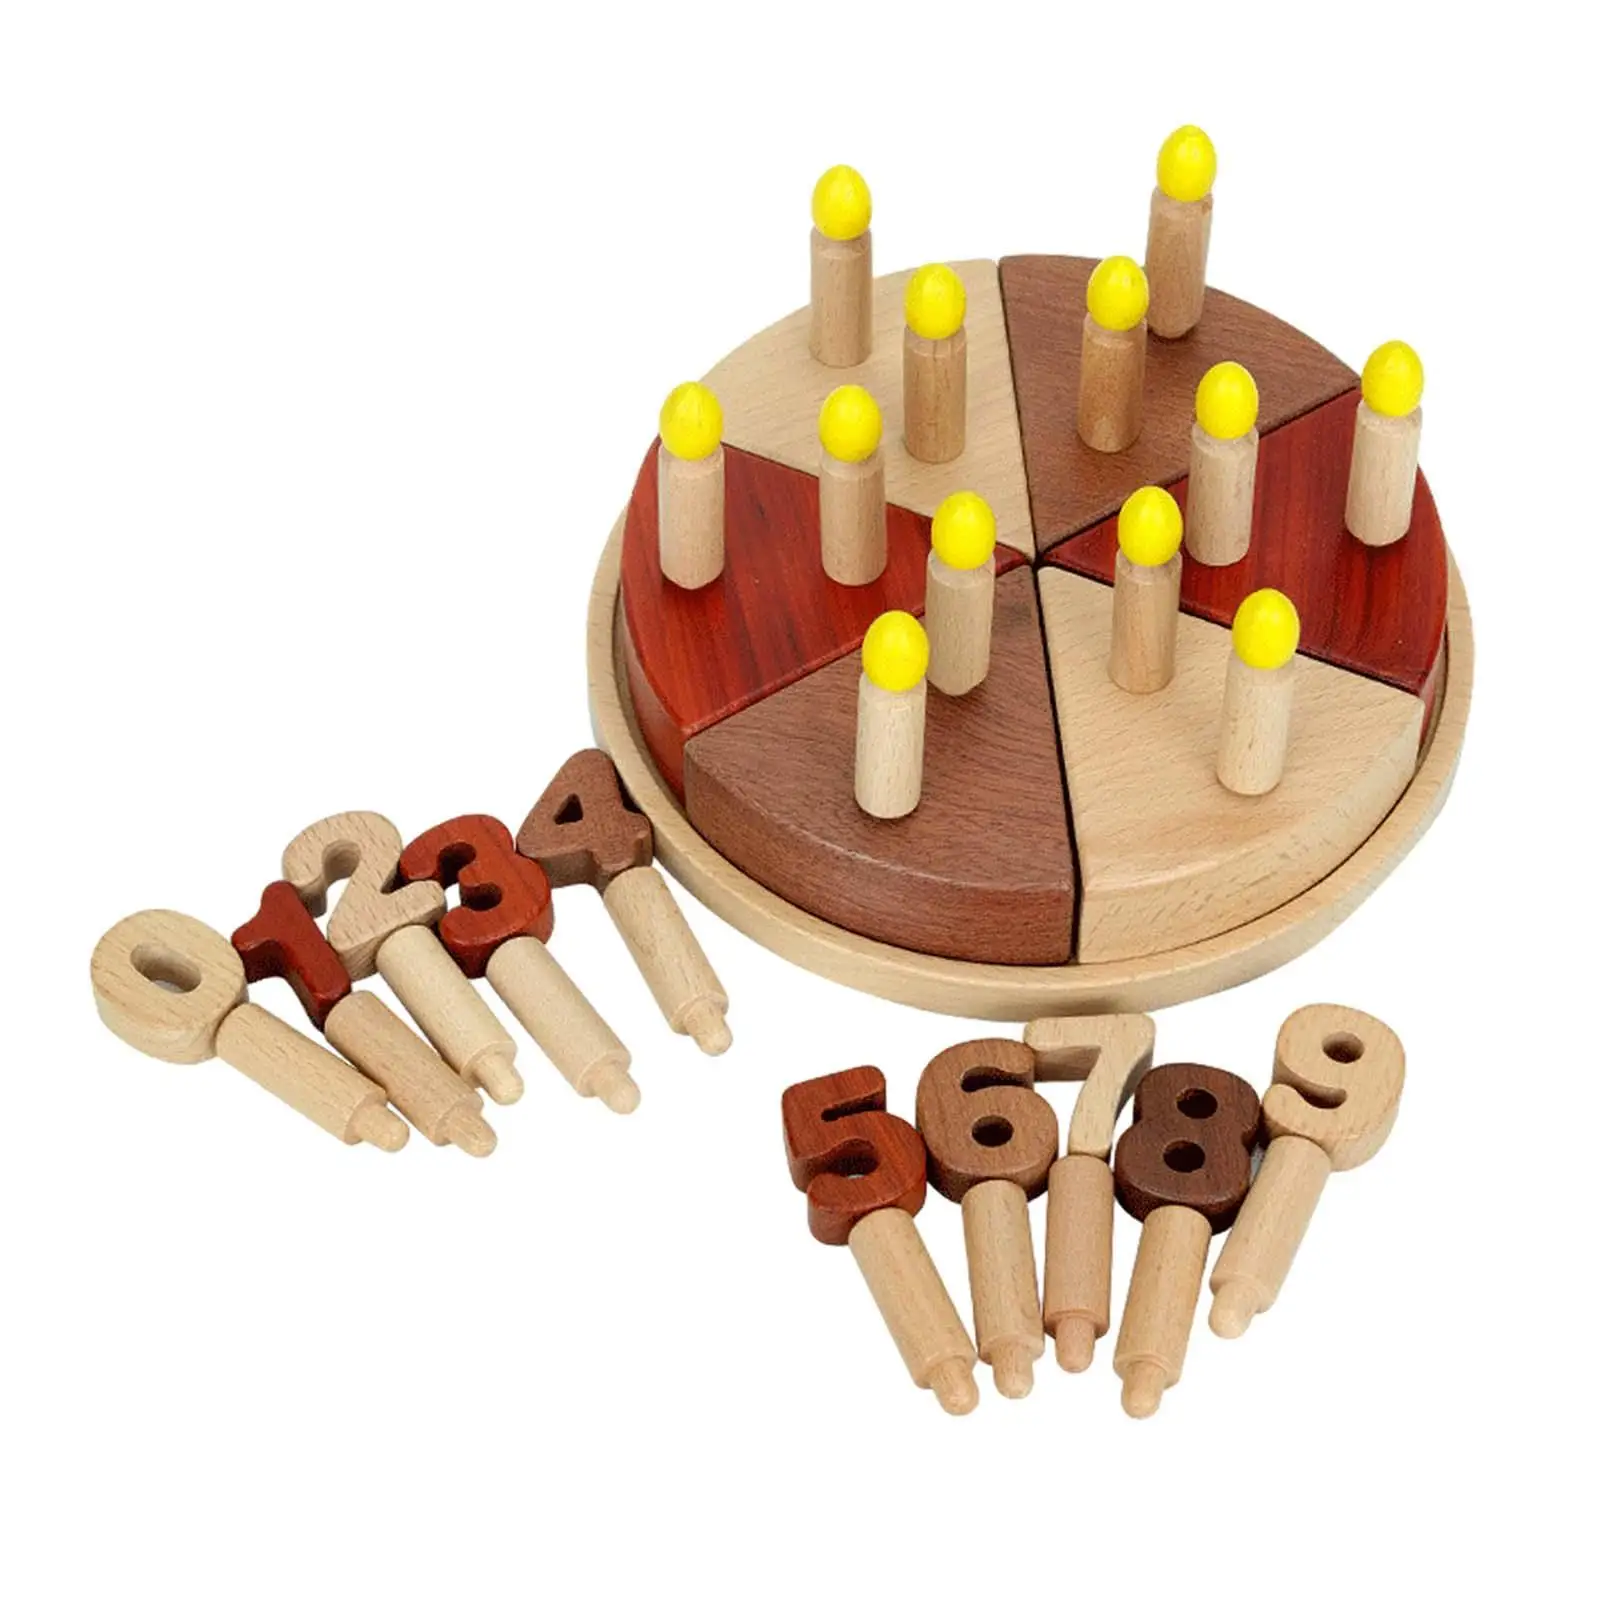 Wooden Birthday Cake Toys Role Play Toy Montessori Gift DIY Play Set Tea Party Toy Playset for Boys Baby Toddlers Preschool